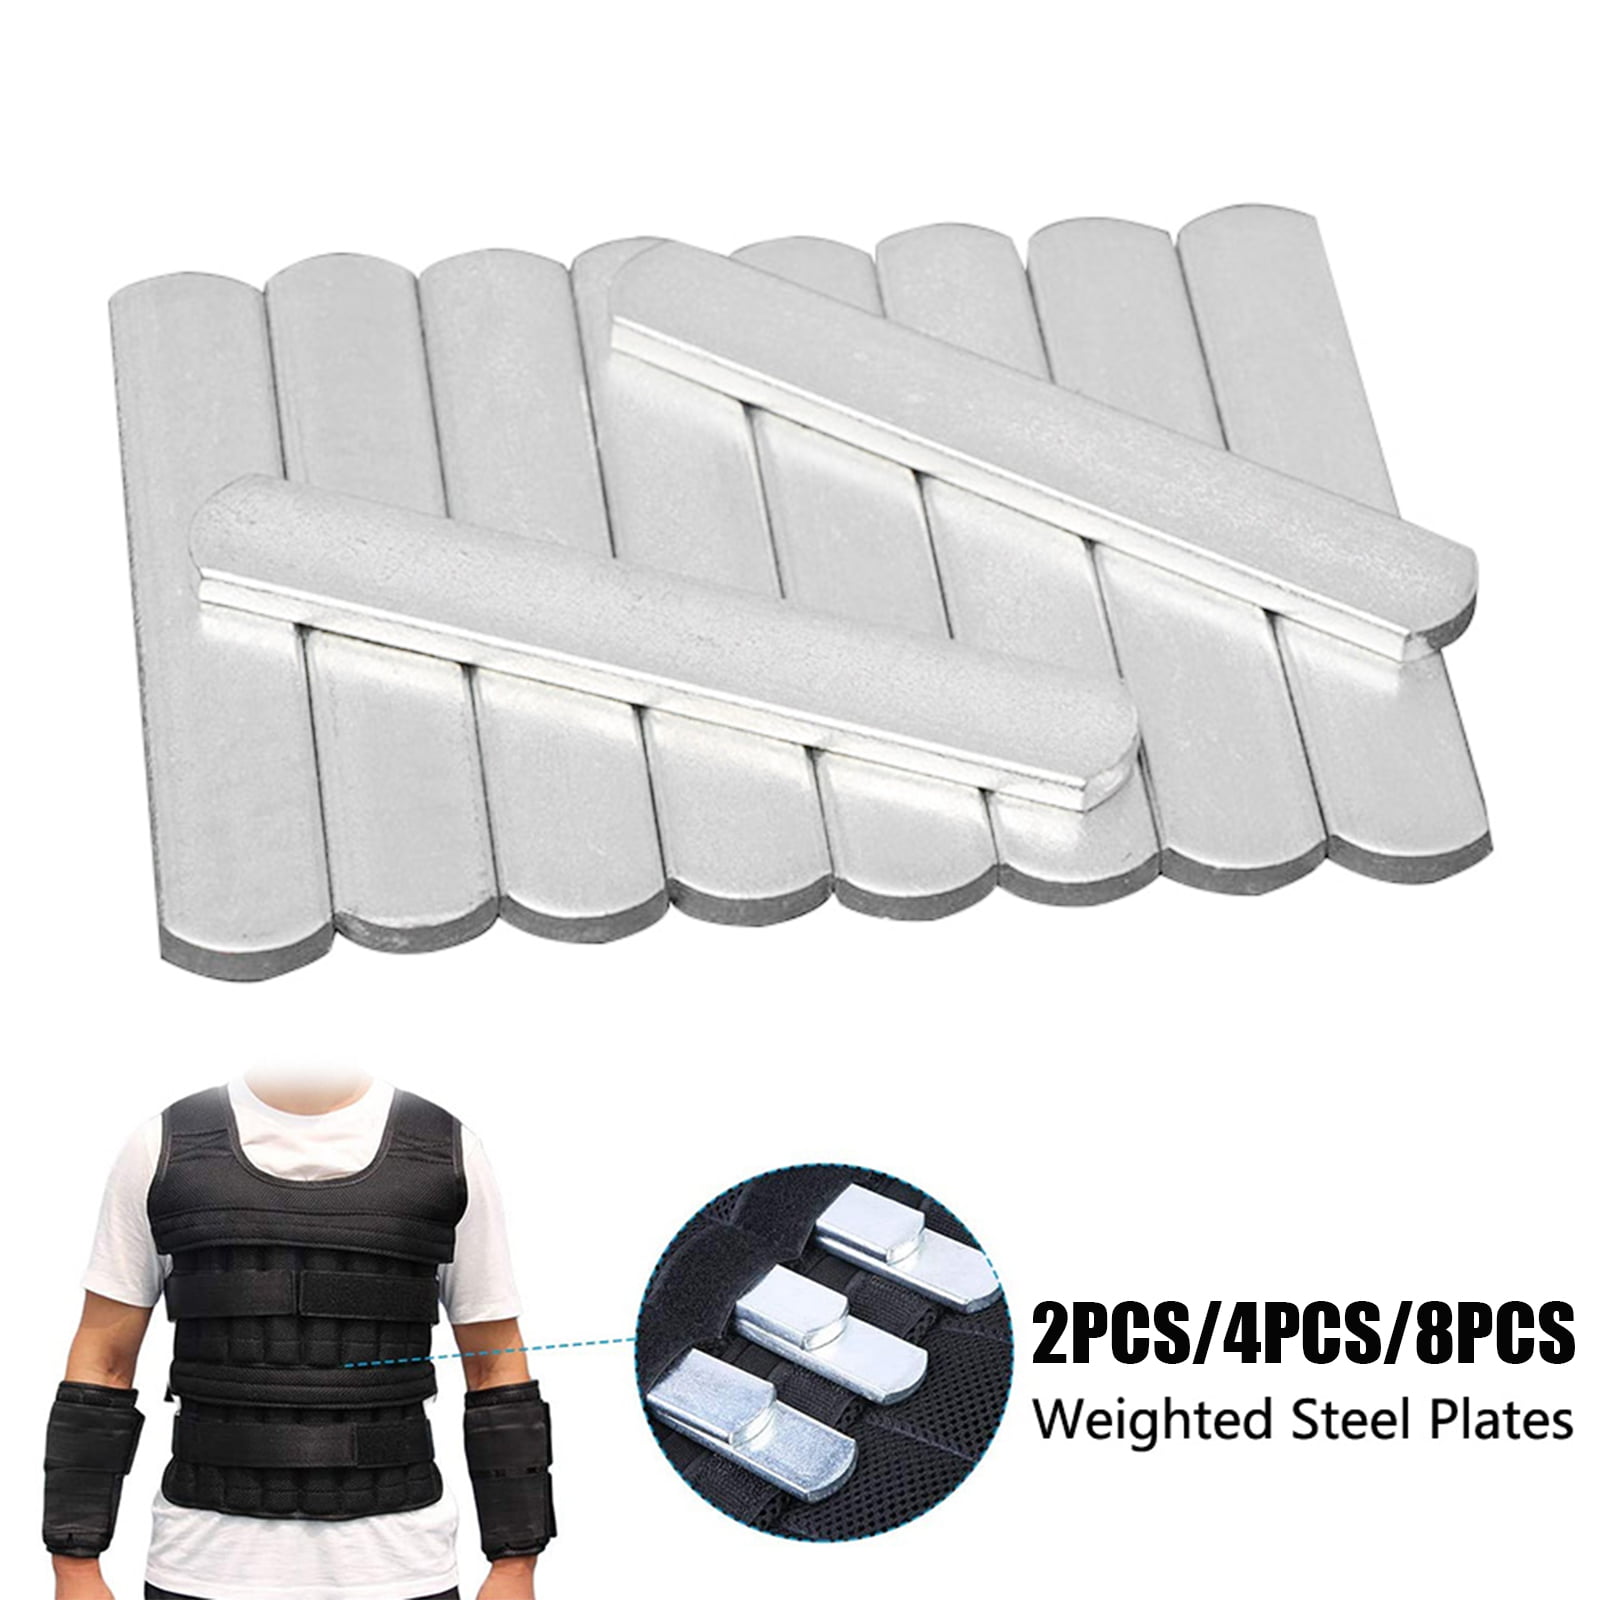 4-16p Steel Plates Weights For Weighted Vest Workout Jacket Running Training Kit 